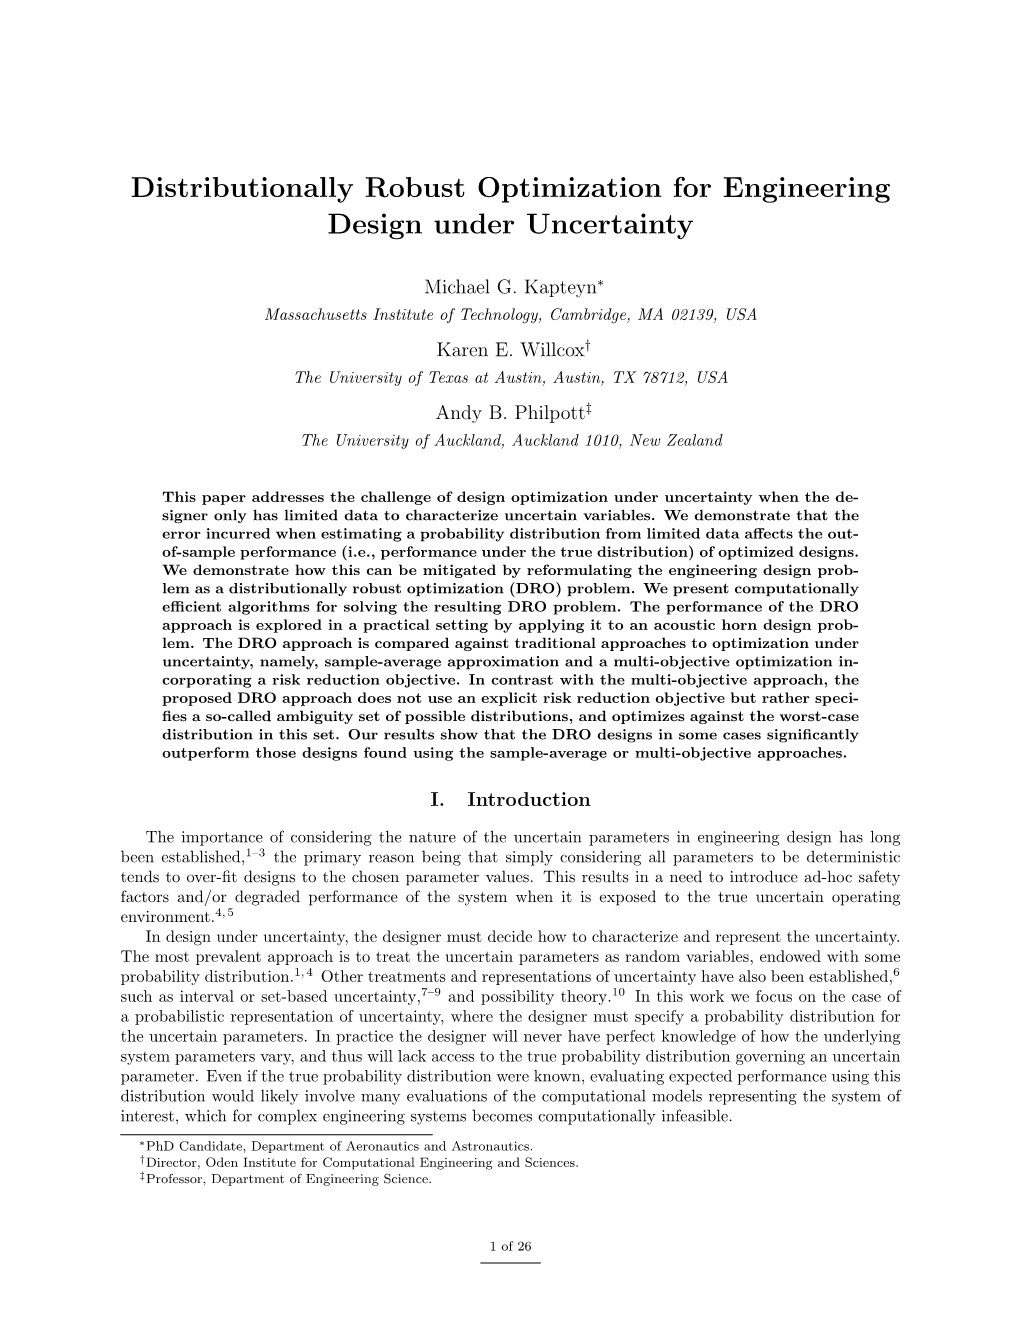 Distributionally Robust Optimization for Engineering Design Under Uncertainty